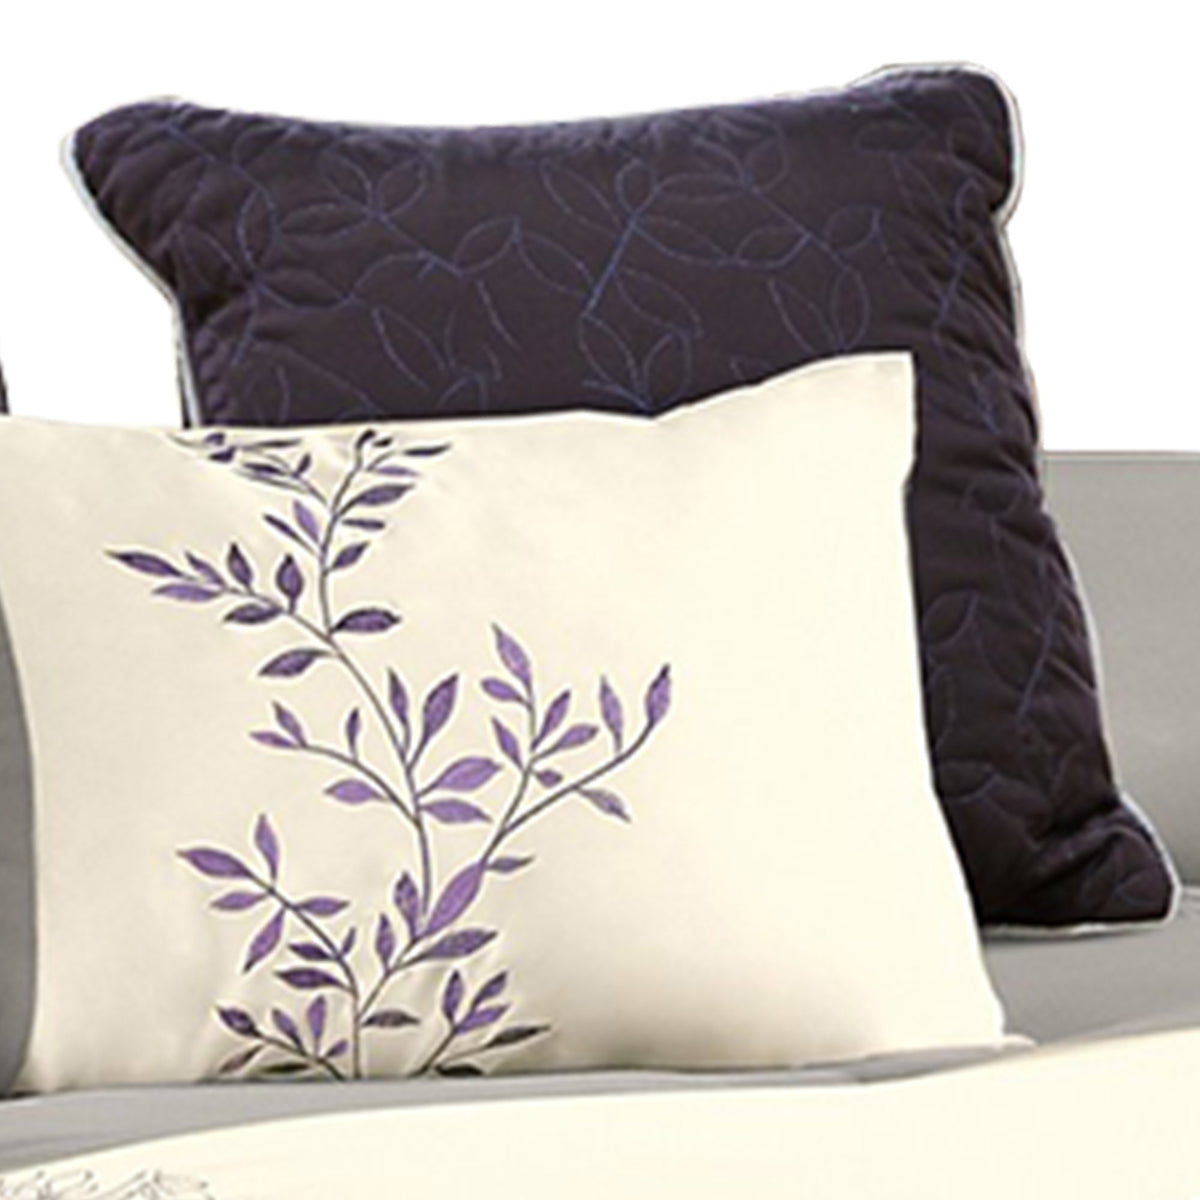 7 Piece Queen Polyester Comforter Set with Leaf Embroidery, Gray and Purple - BM225190